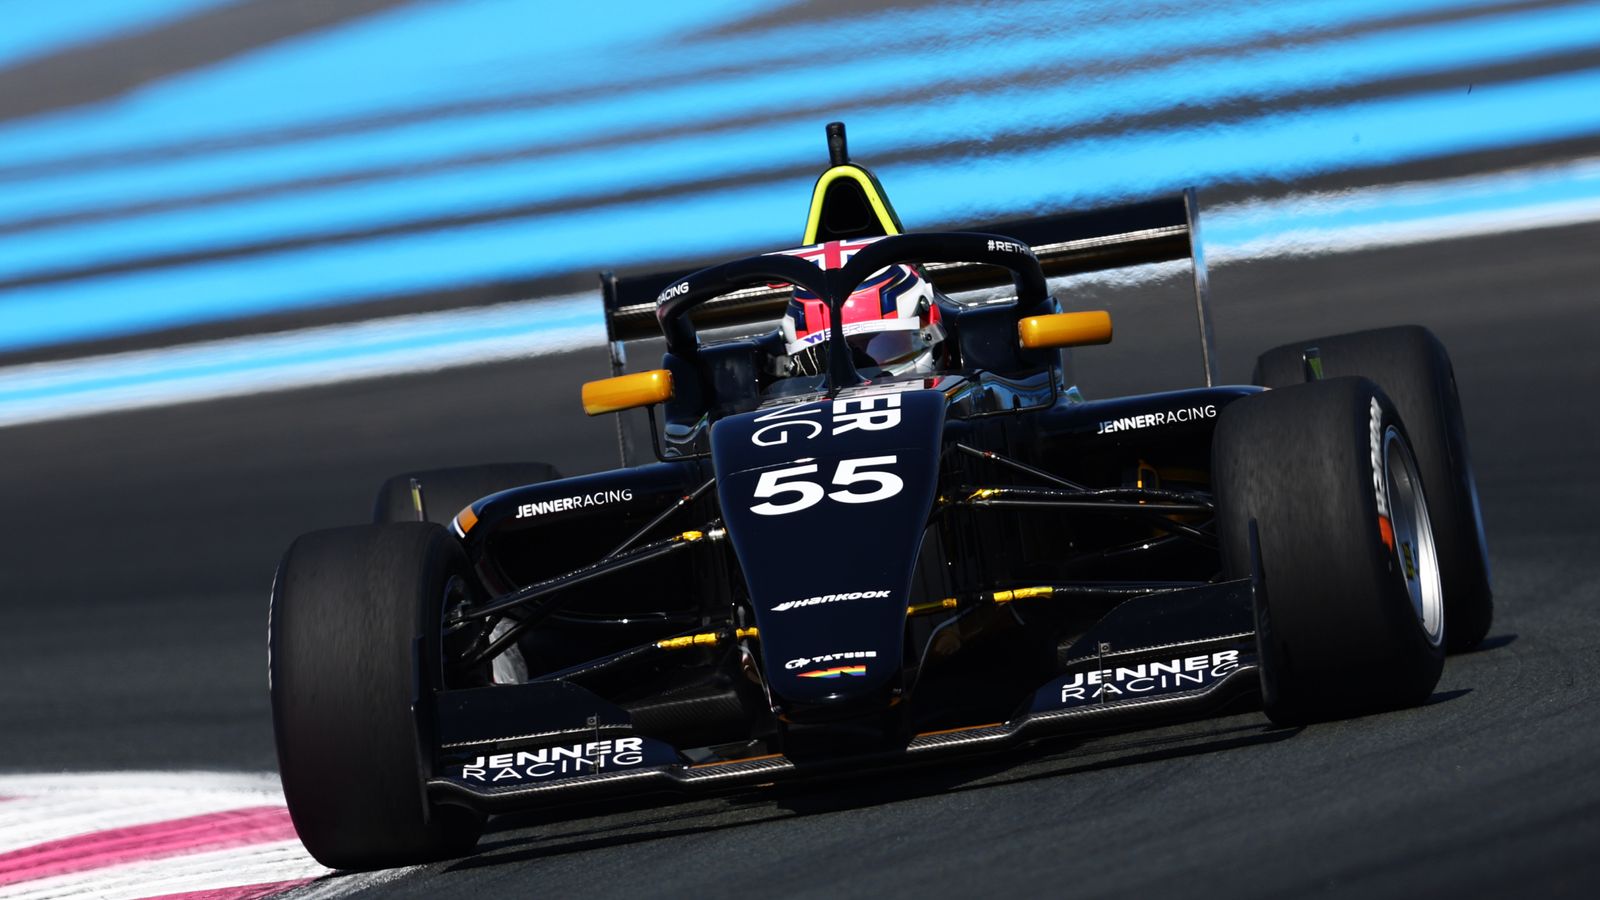 W Series Qualifying: Jamie Chadwick secures pole position at Circuit Paul Ricard with investigation pending